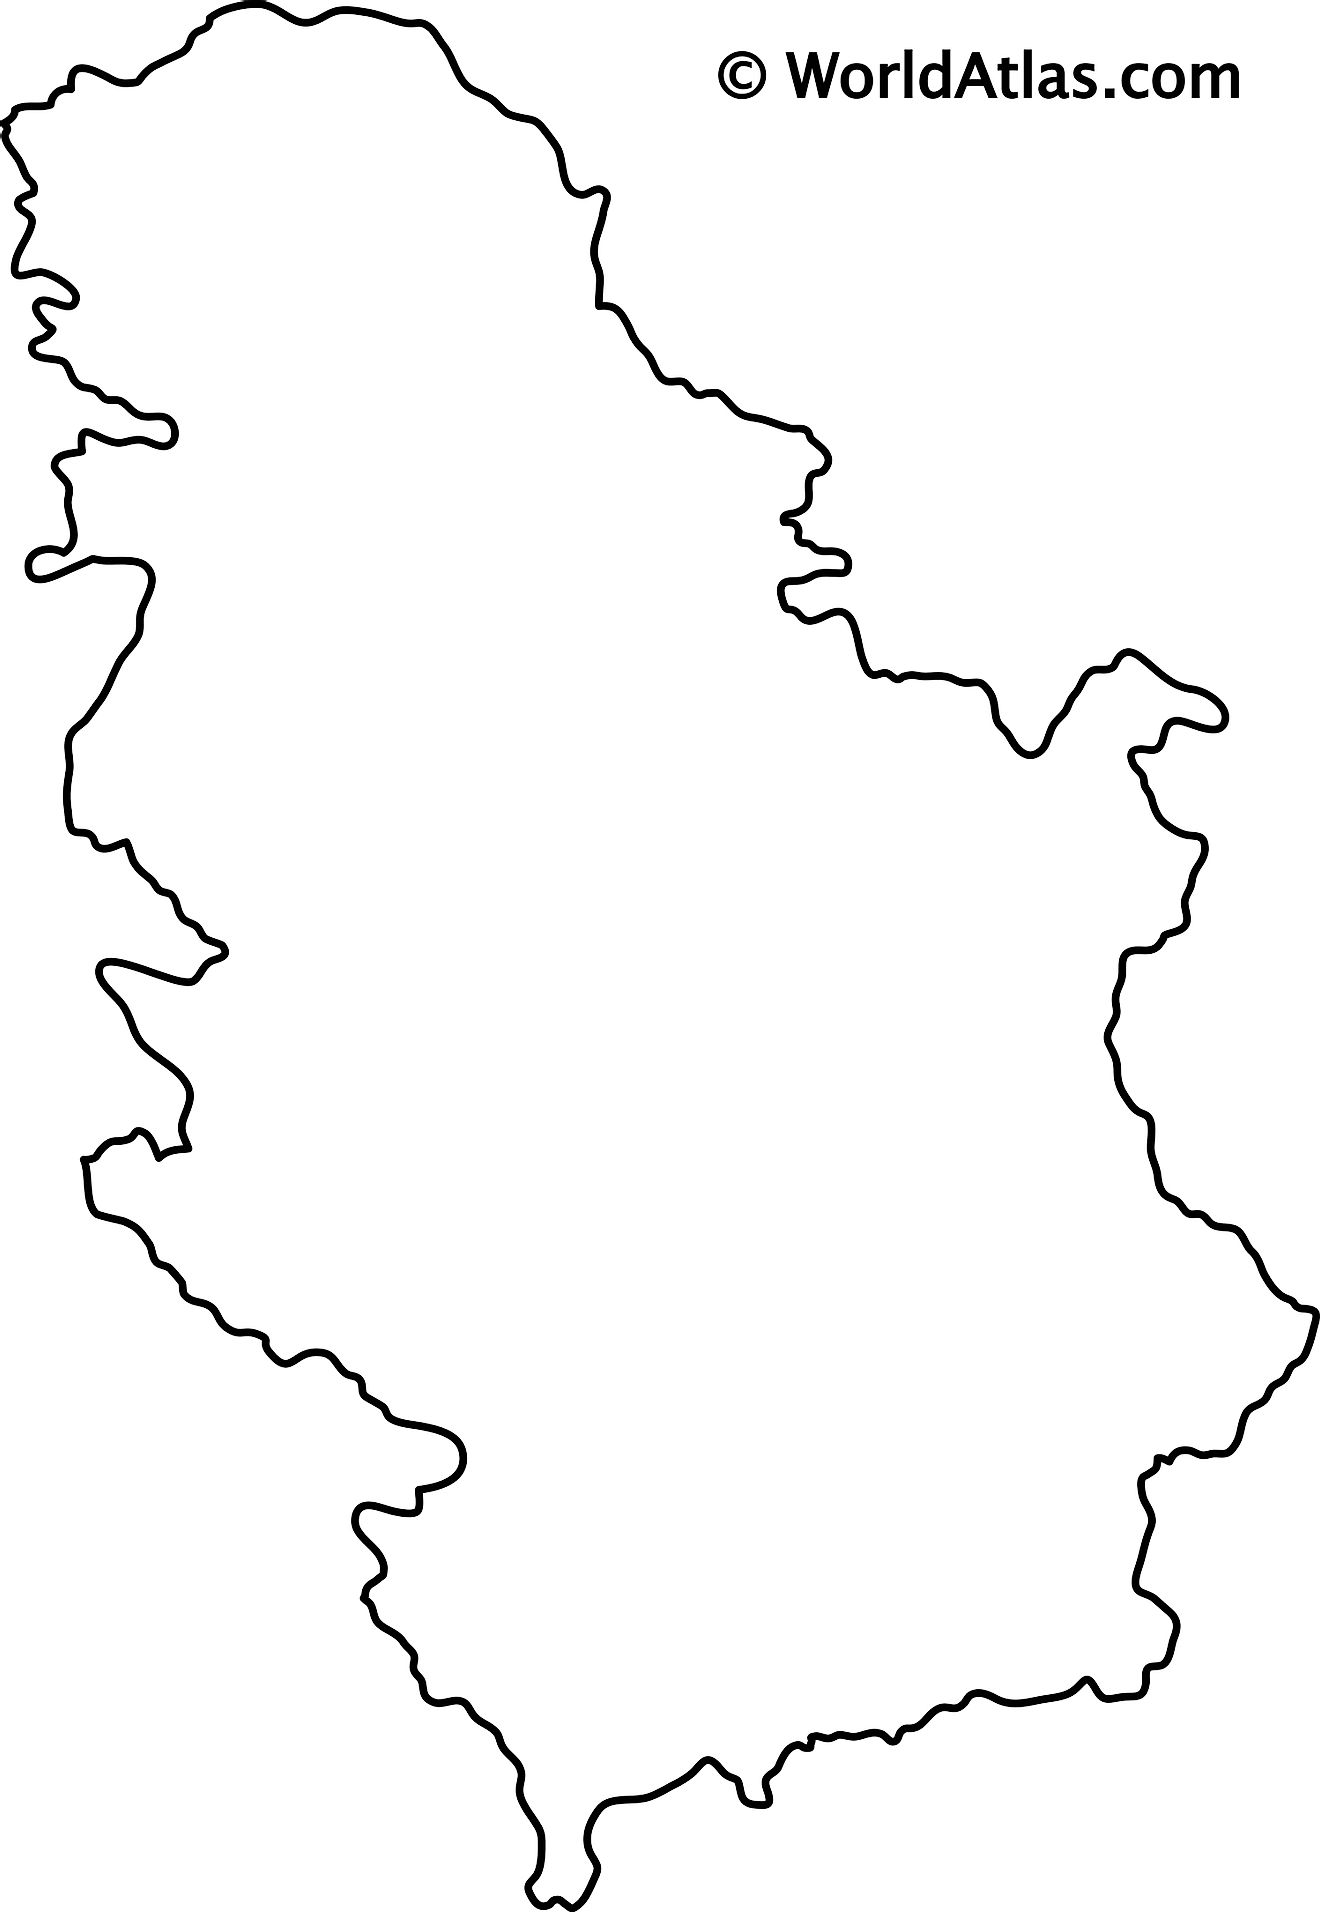 Blank Outline Map of Serbia